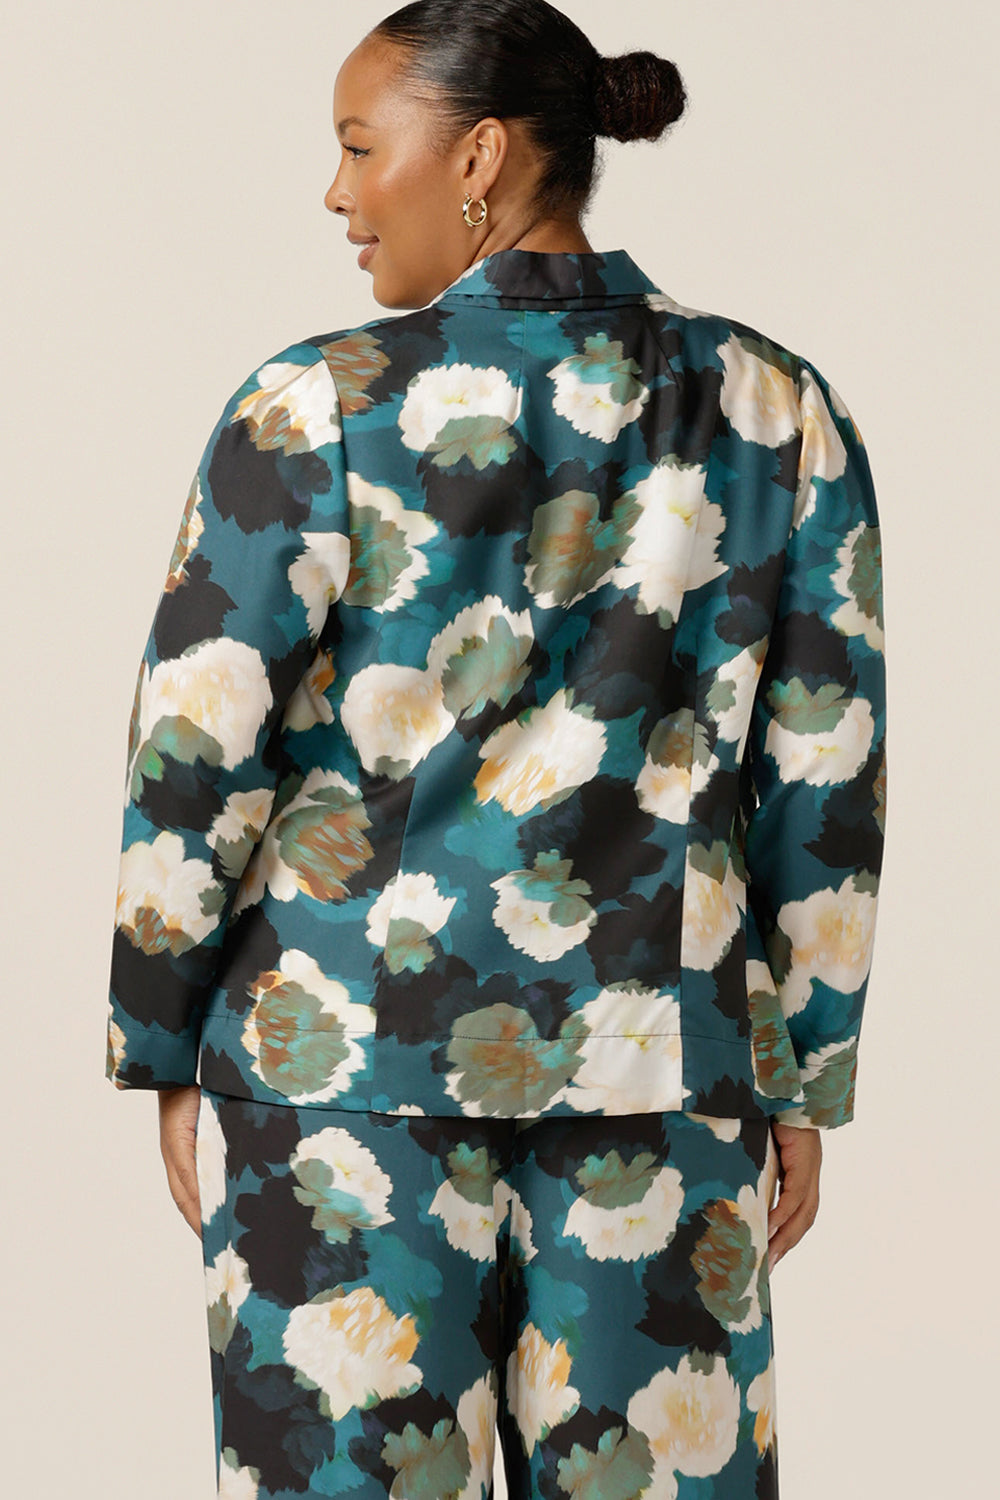 a size 18, curvy woman wears the best jacket for autumn/winter 2023. In sustainable Tencel fabric, this jacket's floral print (designed exclusively for Australian-made women's clothing company L&F) is on a teal base with white and navy flowers. A luxury jacket, shop work wear jackets in plus sizes for fuller figure online at leina and fleur. 